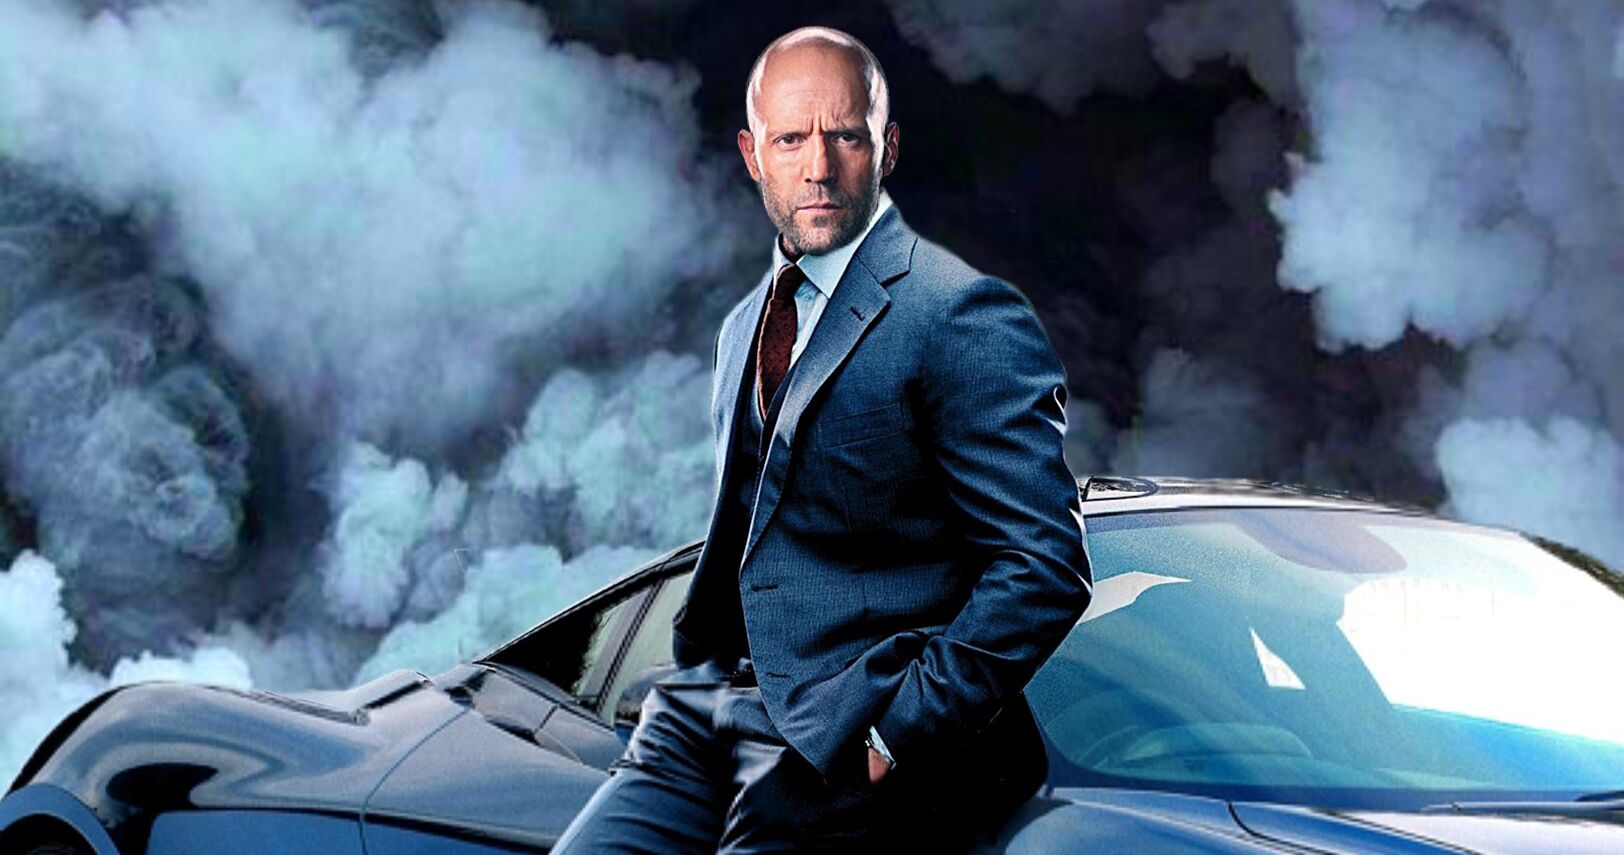 Jason Statham Hopes to Return for the Final Two Fast & Furious Movies